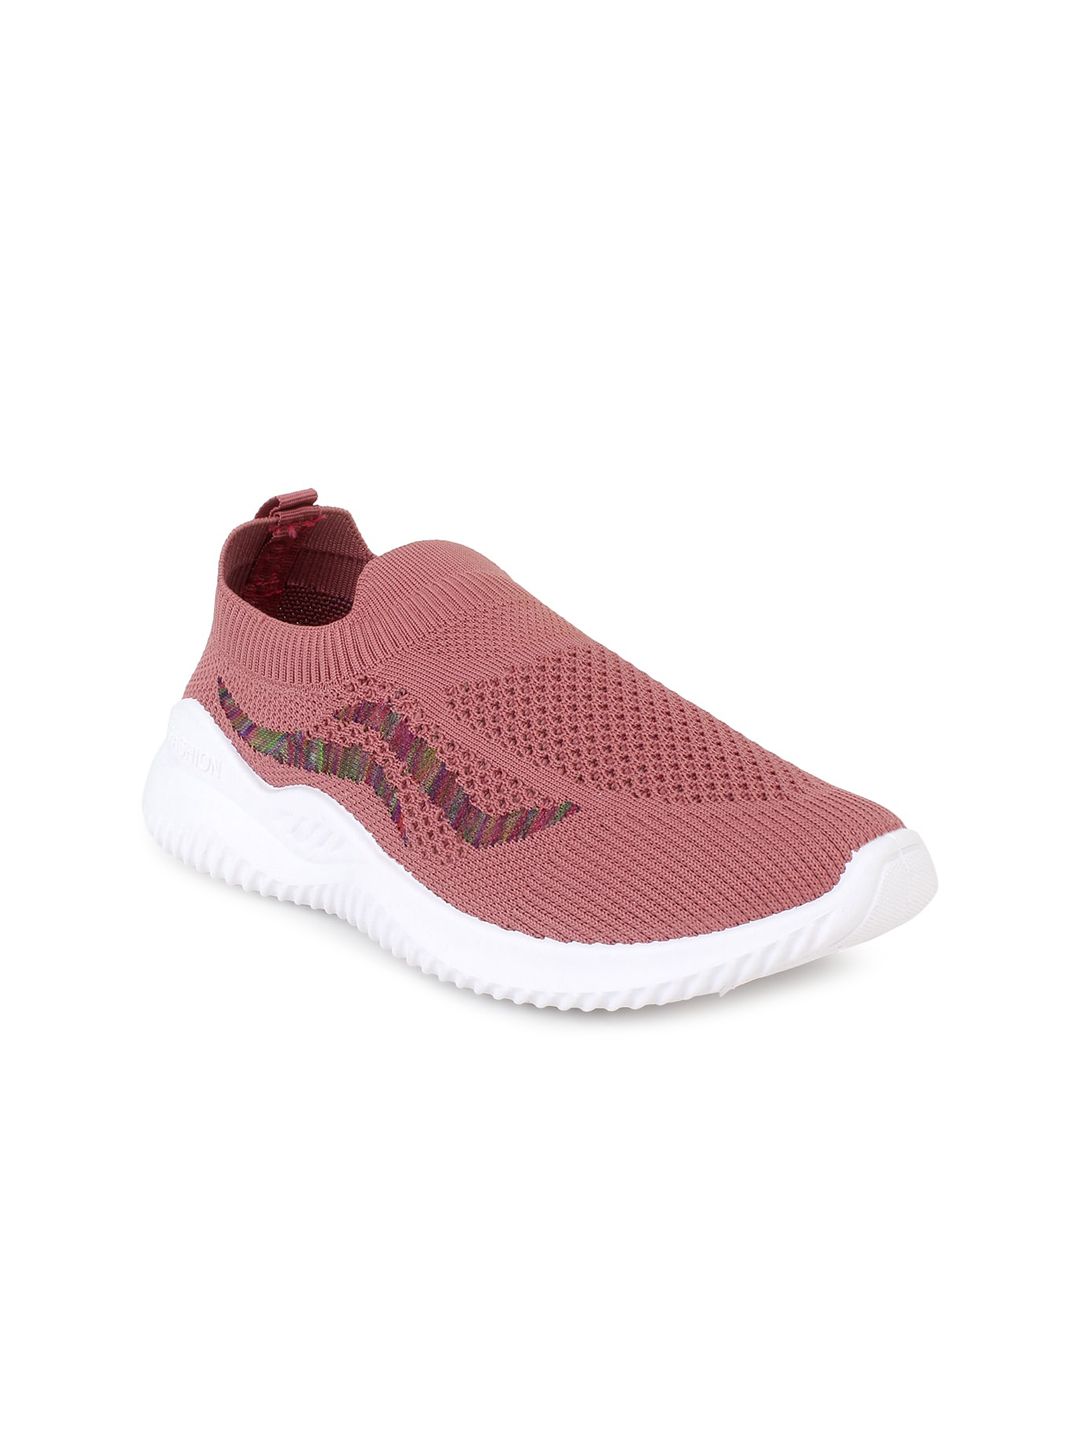 Champs Women Pink Woven Design Slip-On Sneakers Price in India